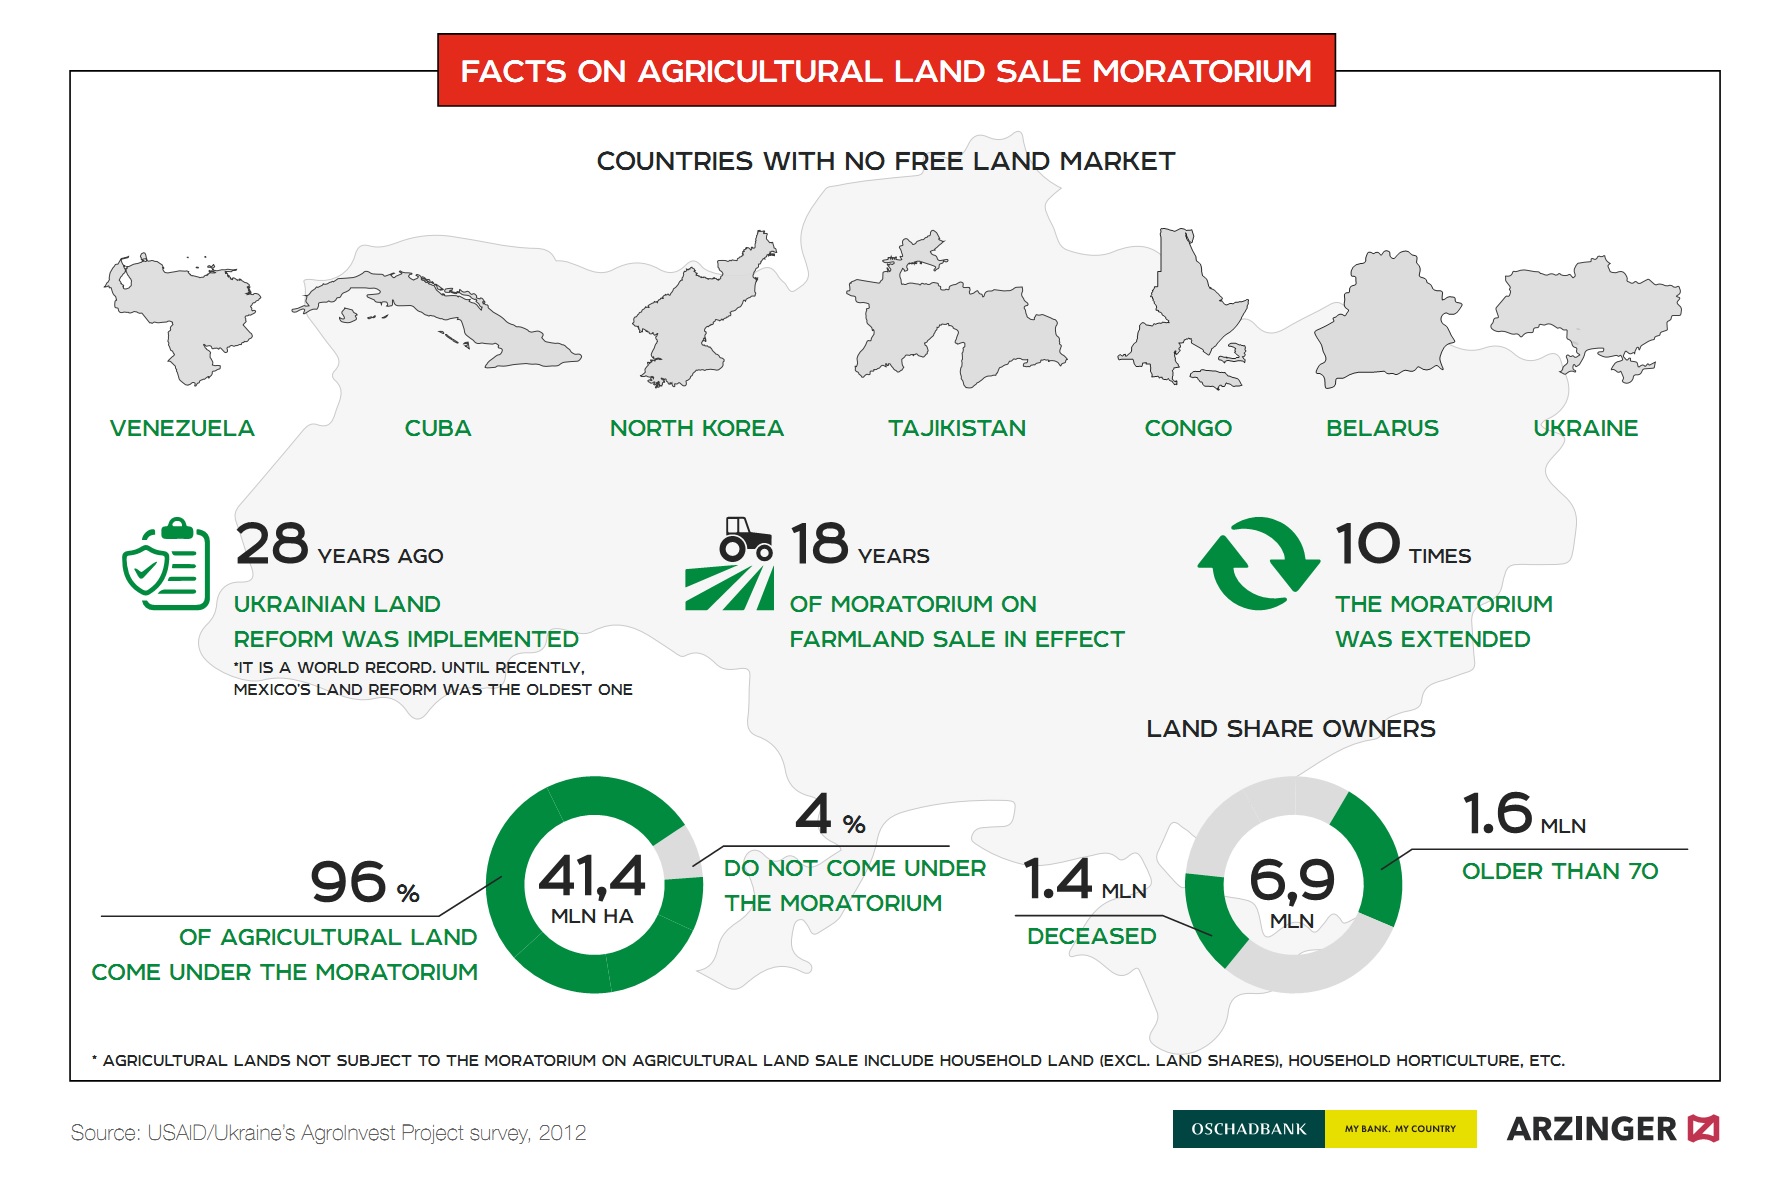 Facts of agricultural land sale moratorium (click for full resolution)